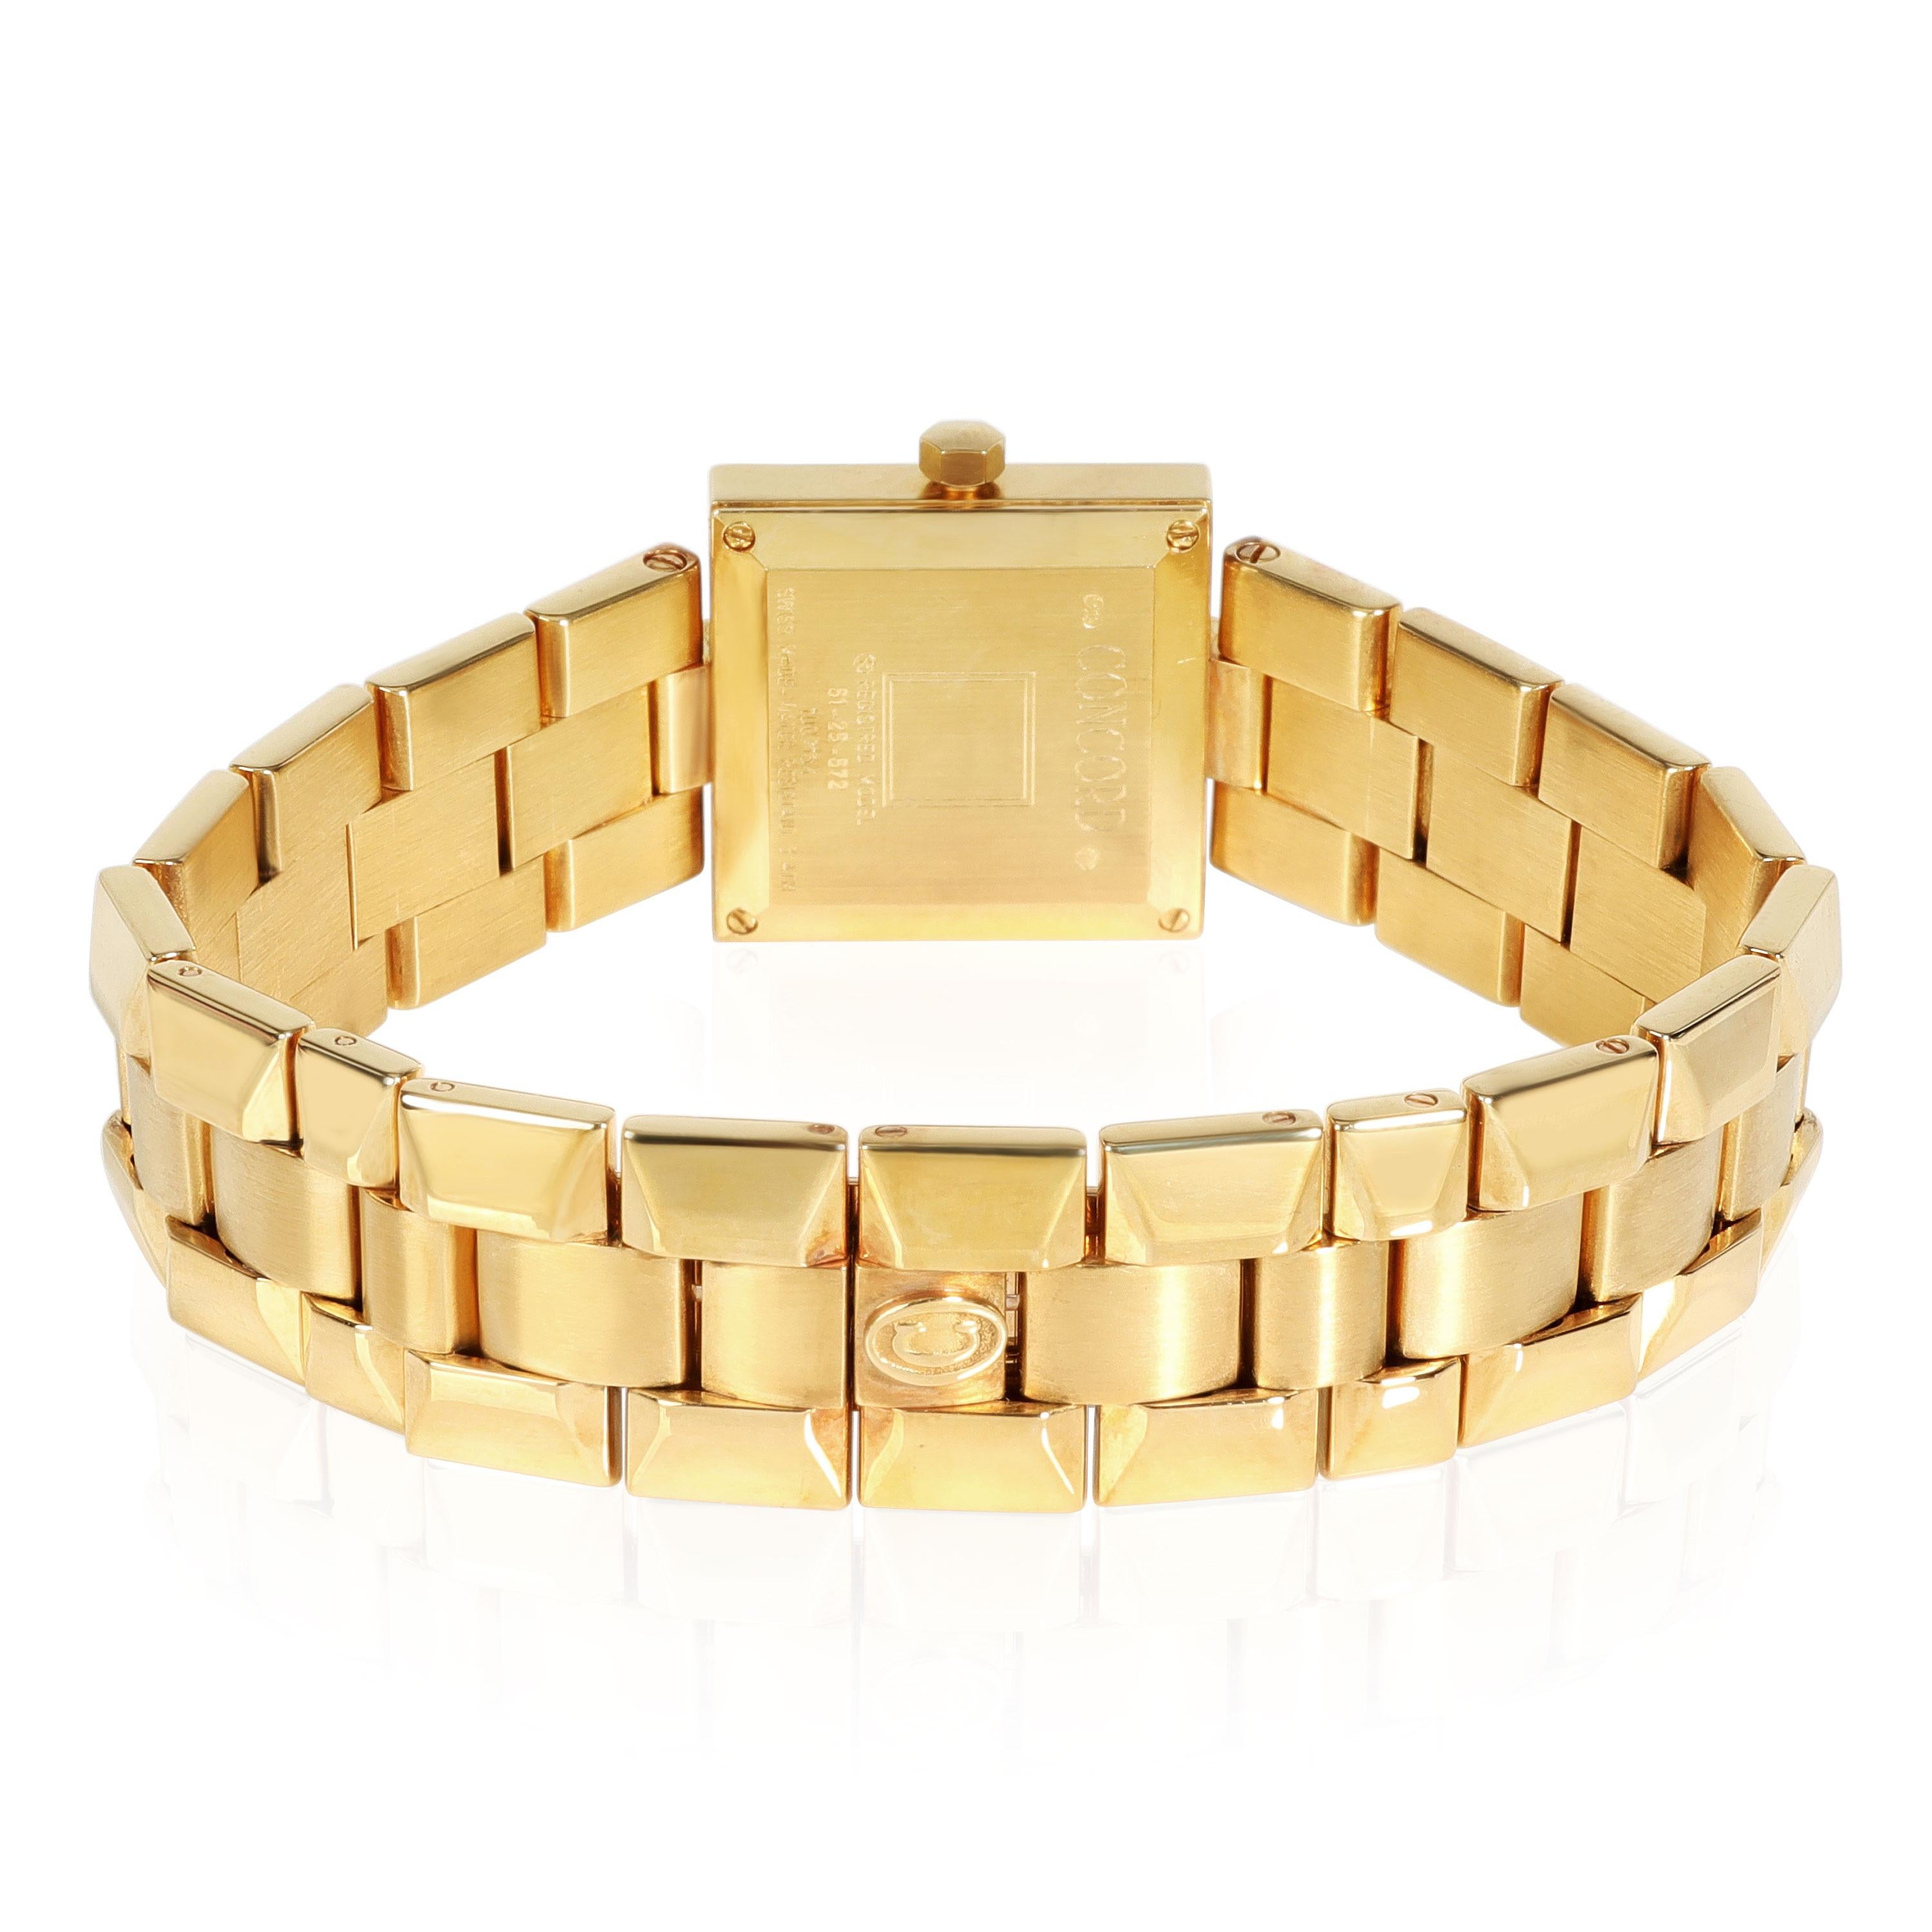 Concord La Scala 0308158  51-25-572 Women's Watch in 18kt Yellow Gold

SKU: 115668

PRIMARY DETAILS
Brand: Concord
Model: La Scala
Country of Origin: Switzerland
Movement Type: Quartz: Battery
Year of Manufacture: 2010-2019
Condition: Retail price